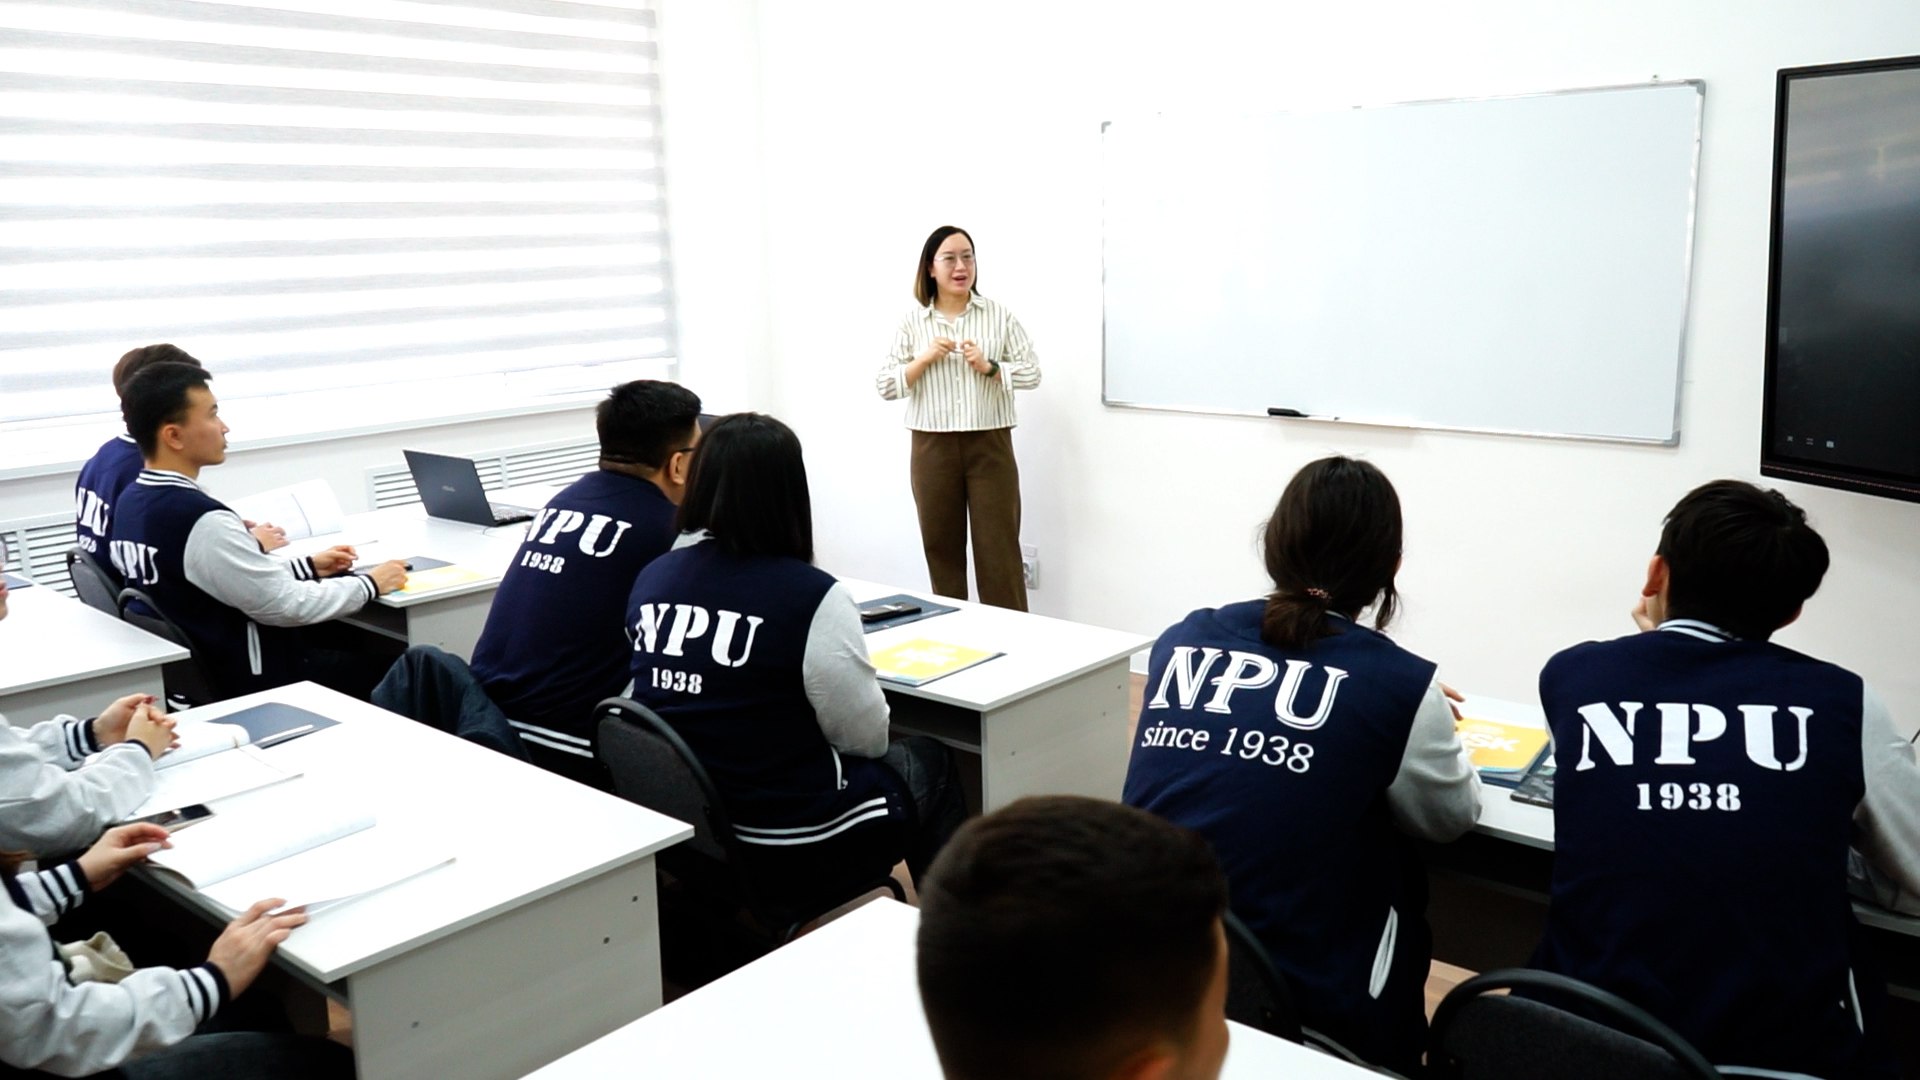 NWPU branch in KazNU gives an opportunity to get the best technical education